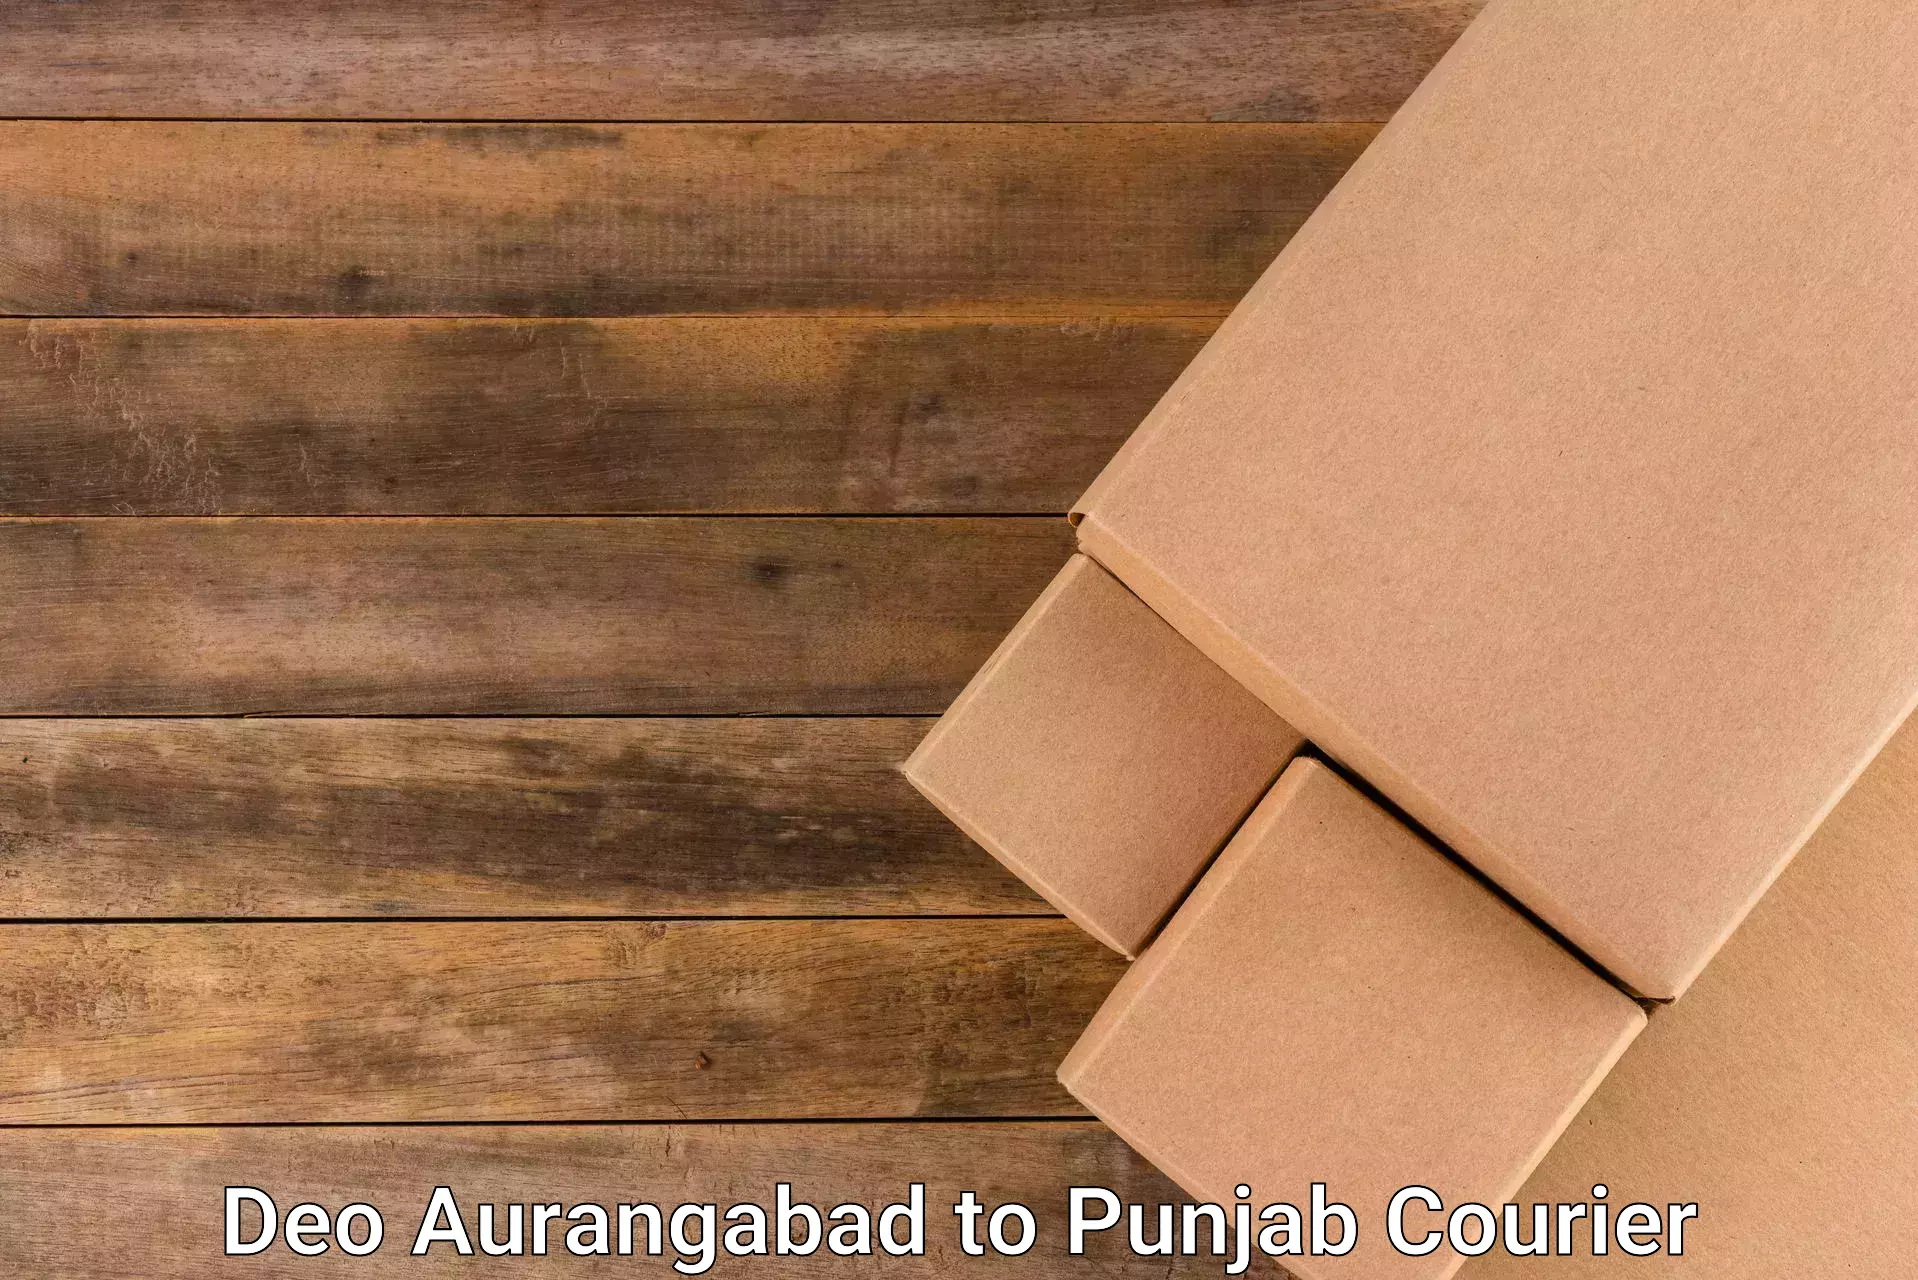 Specialized courier services Deo Aurangabad to Central University of Punjab Bathinda